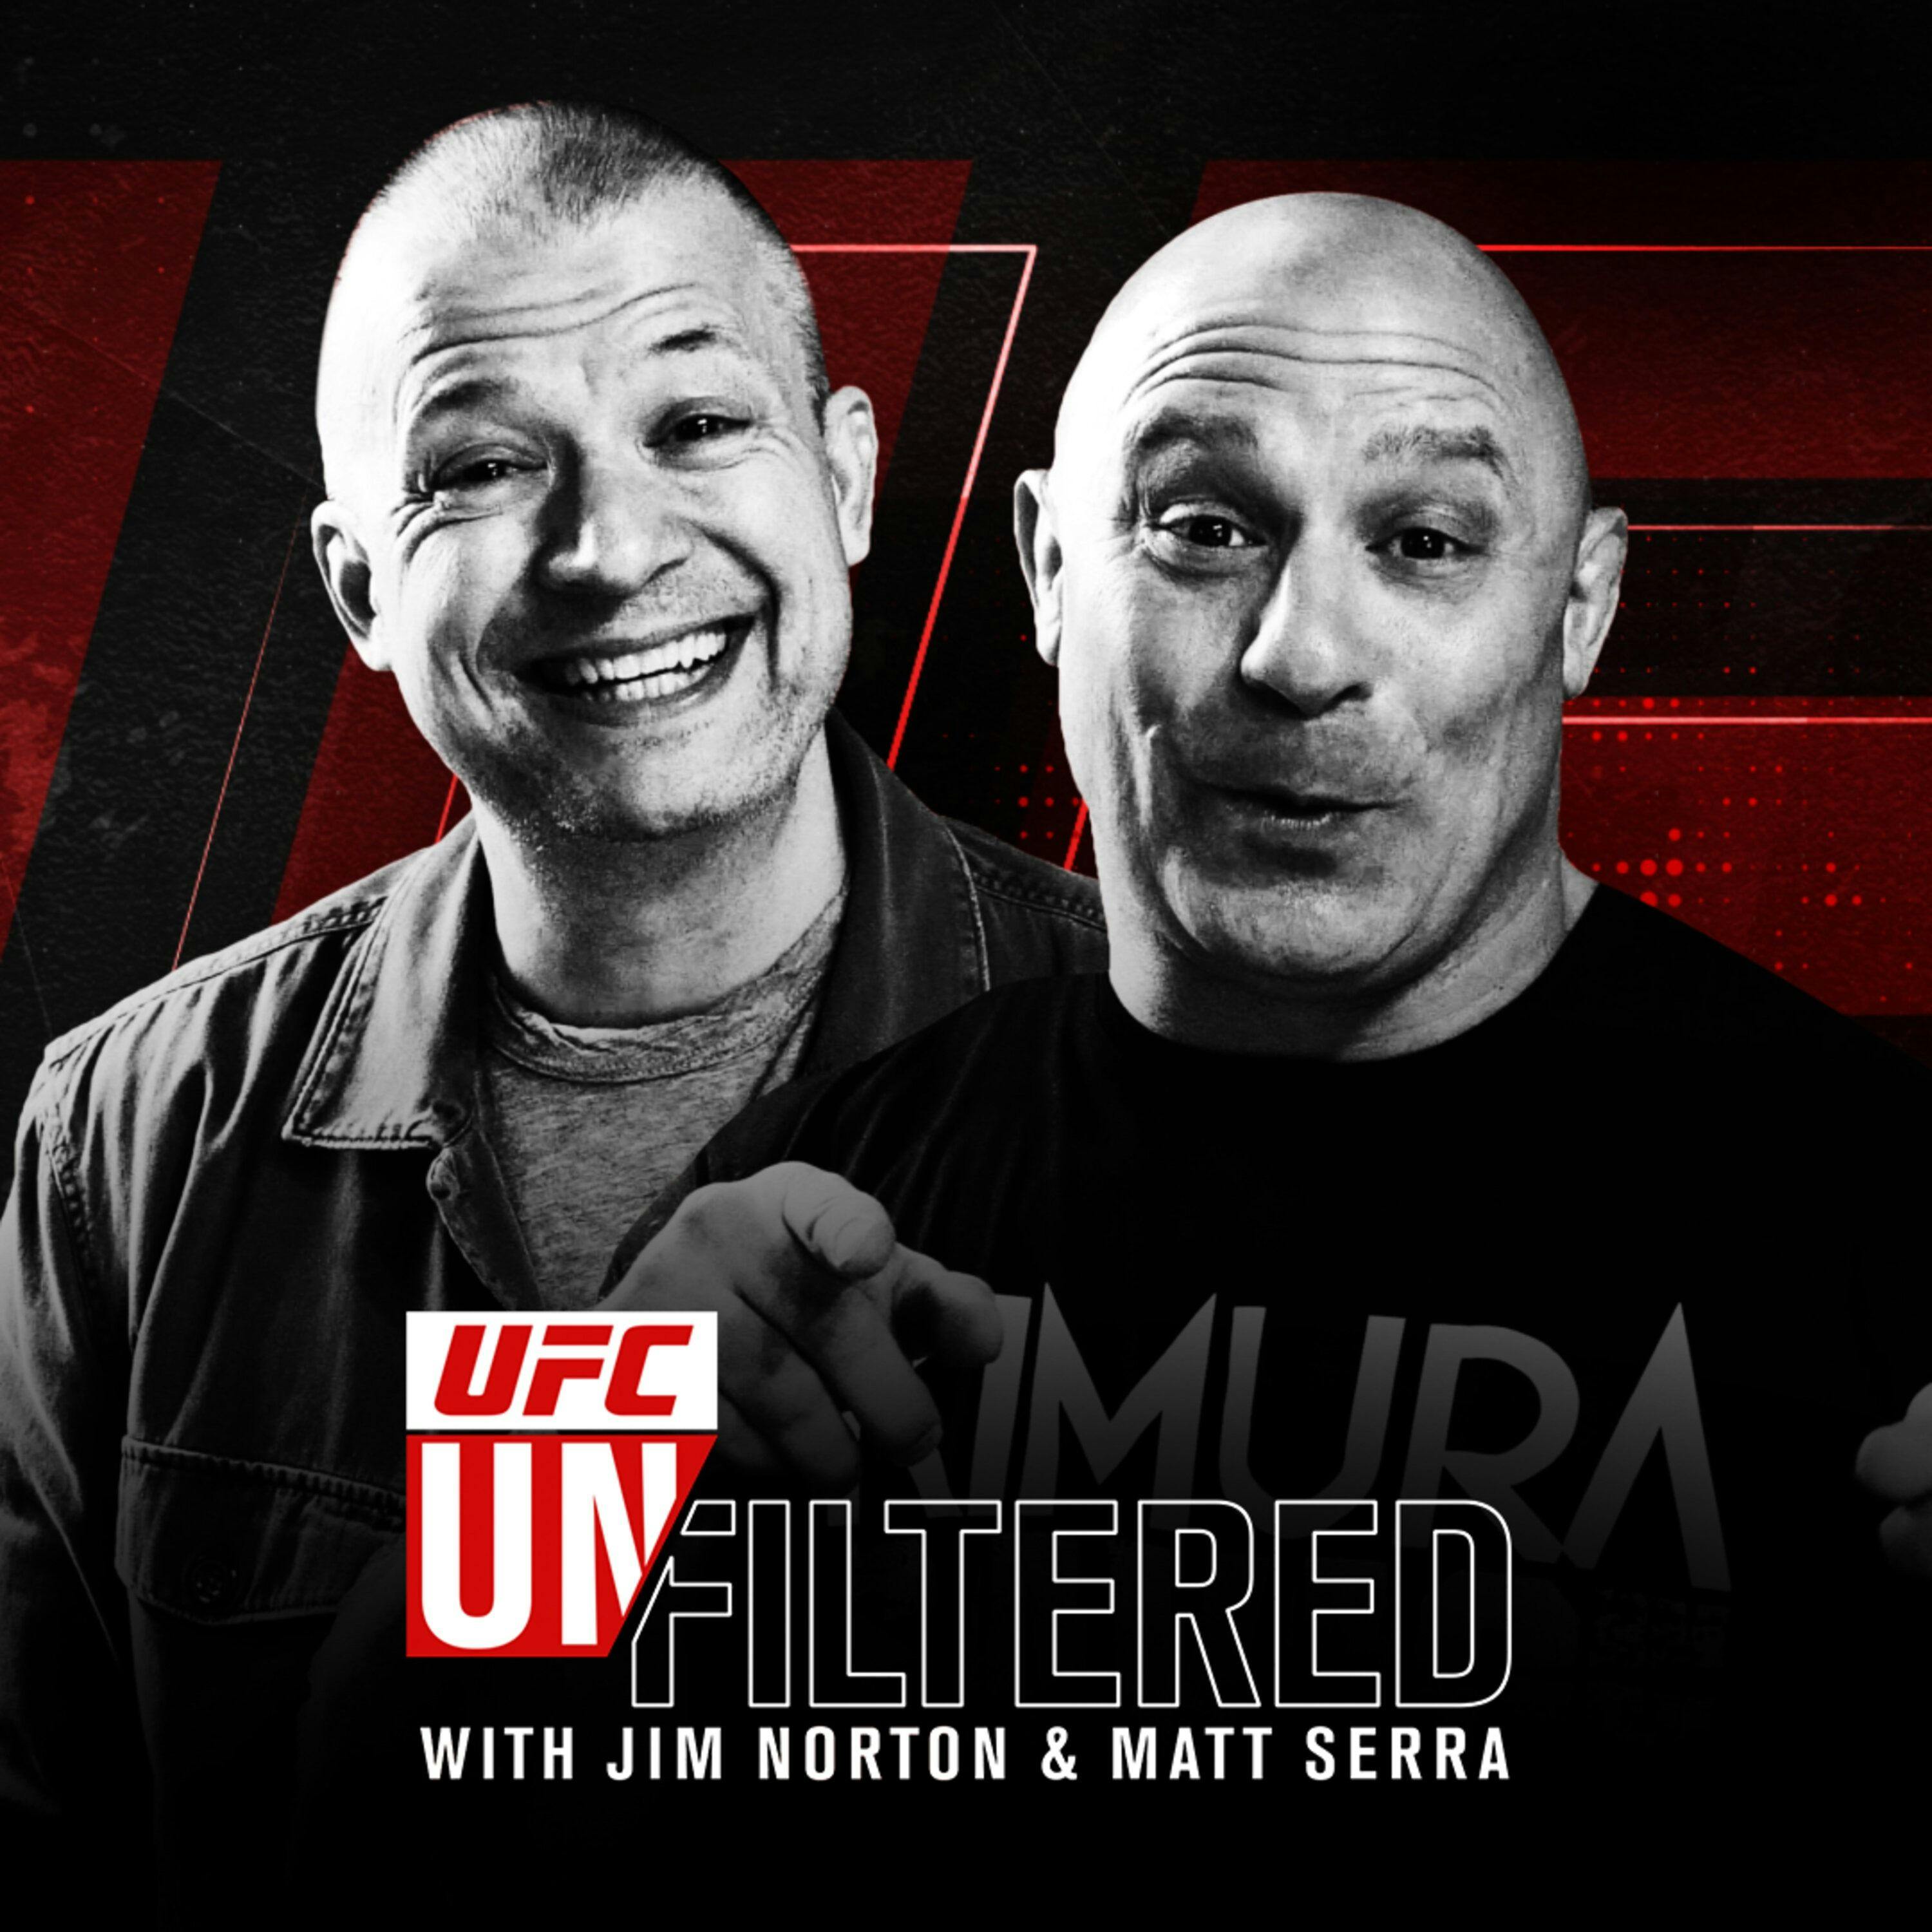 UFC Unfiltered (2016) – Television